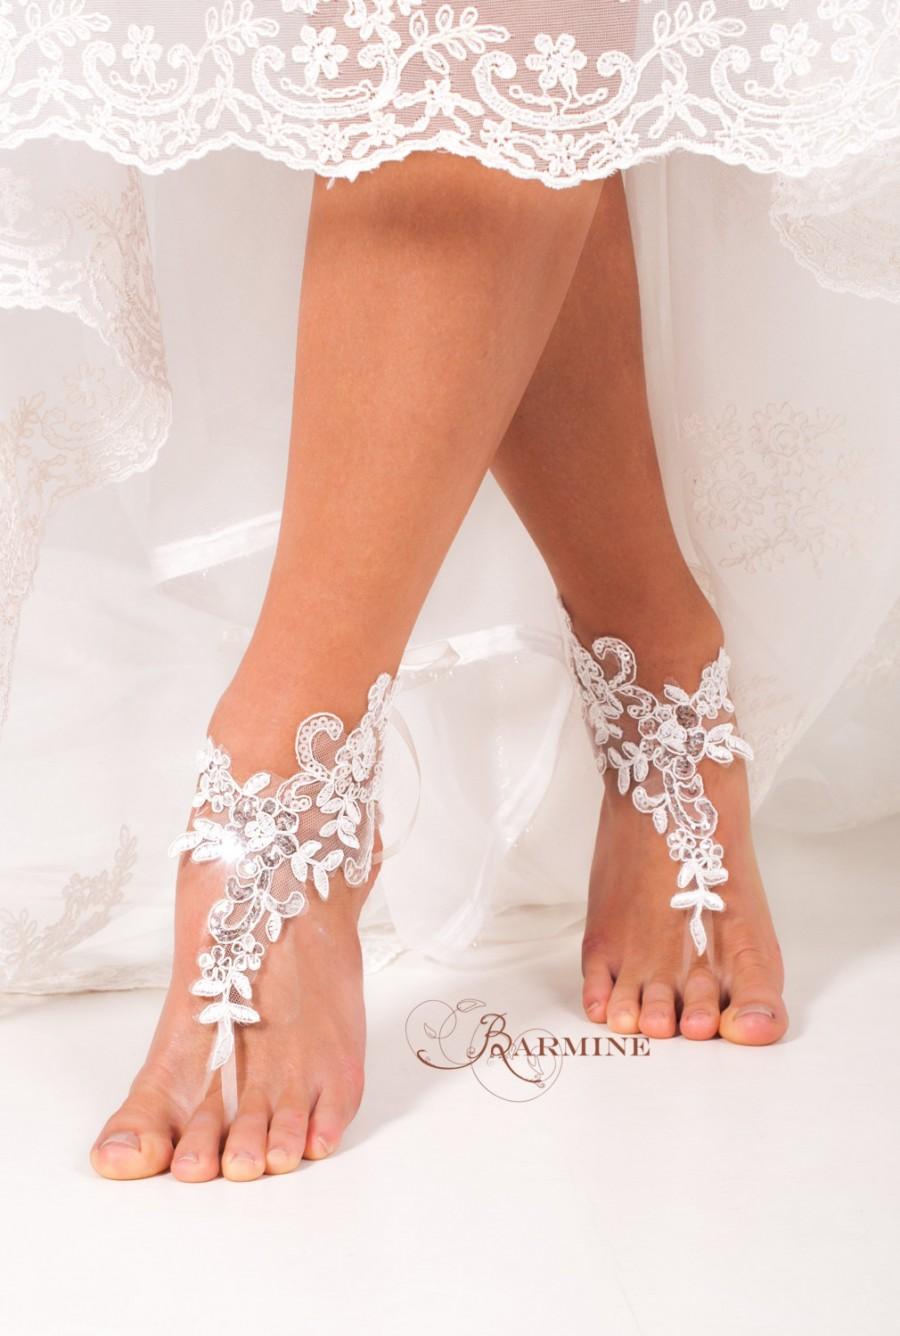 Wedding - Lace barefoot sandals -Bridal footless sandals -Bridal shoes -Bridesmaid barefoot sandals -Beach wedding footless sandal -Foot thongs